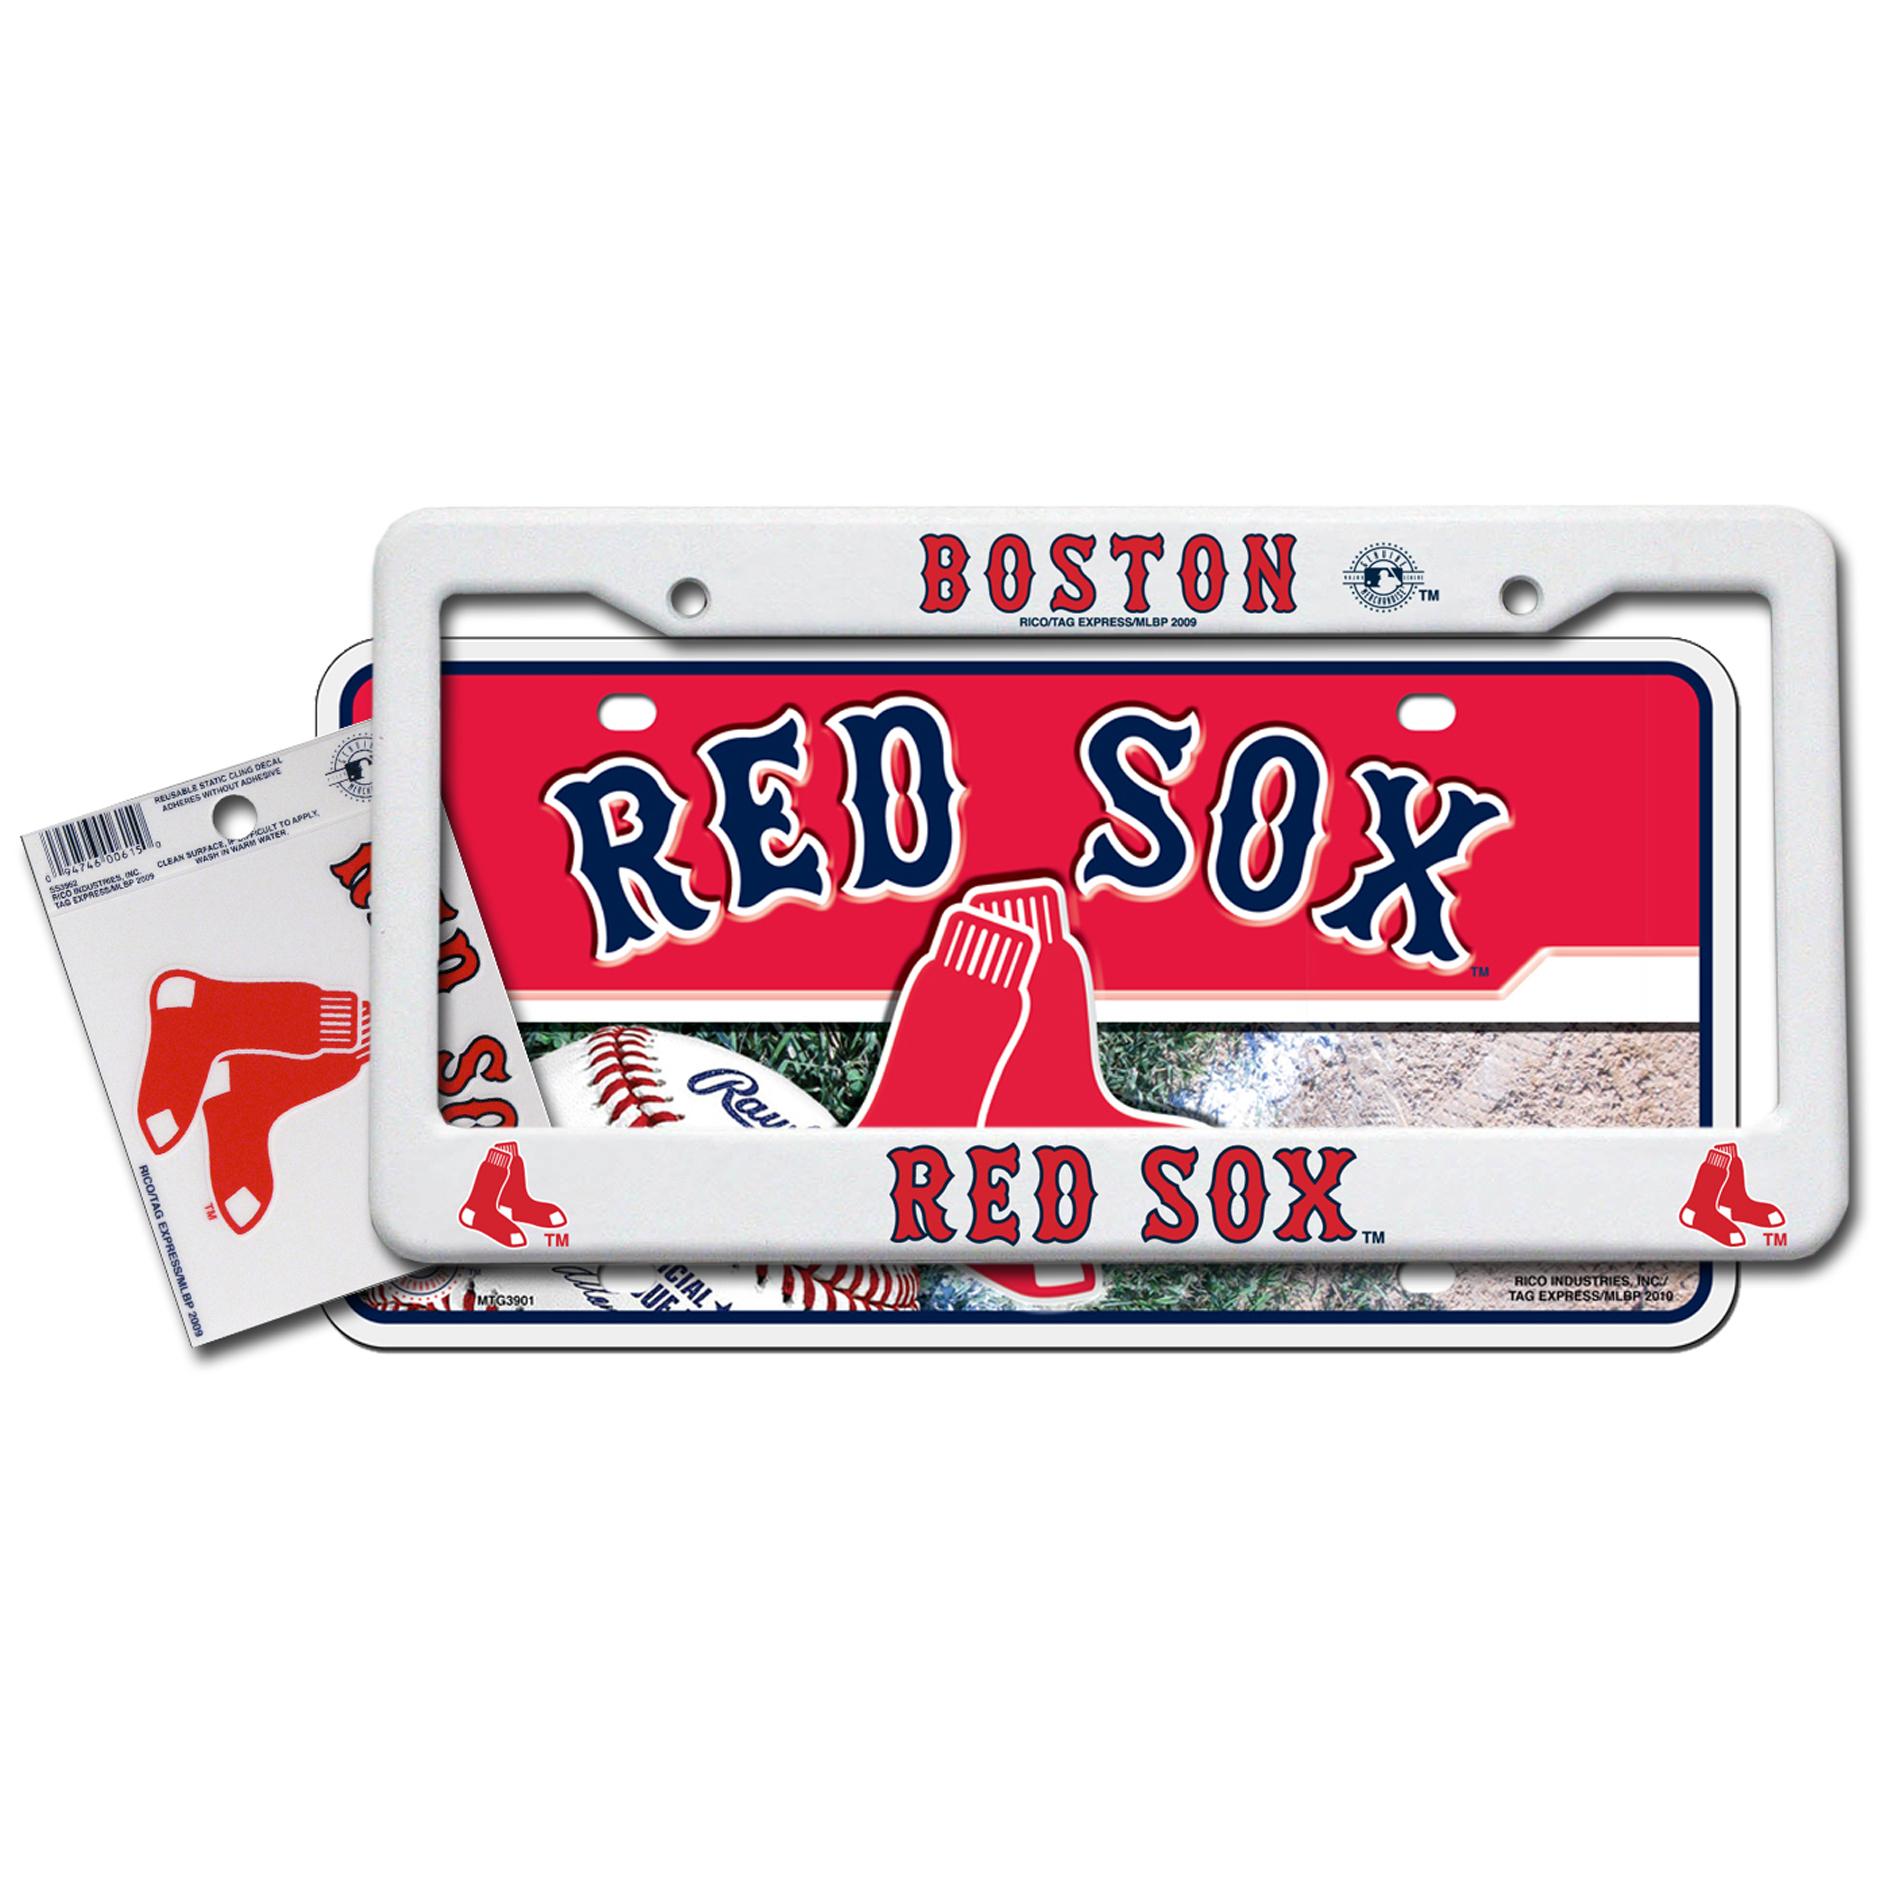 Boston Red Sox Automotive Value Pack